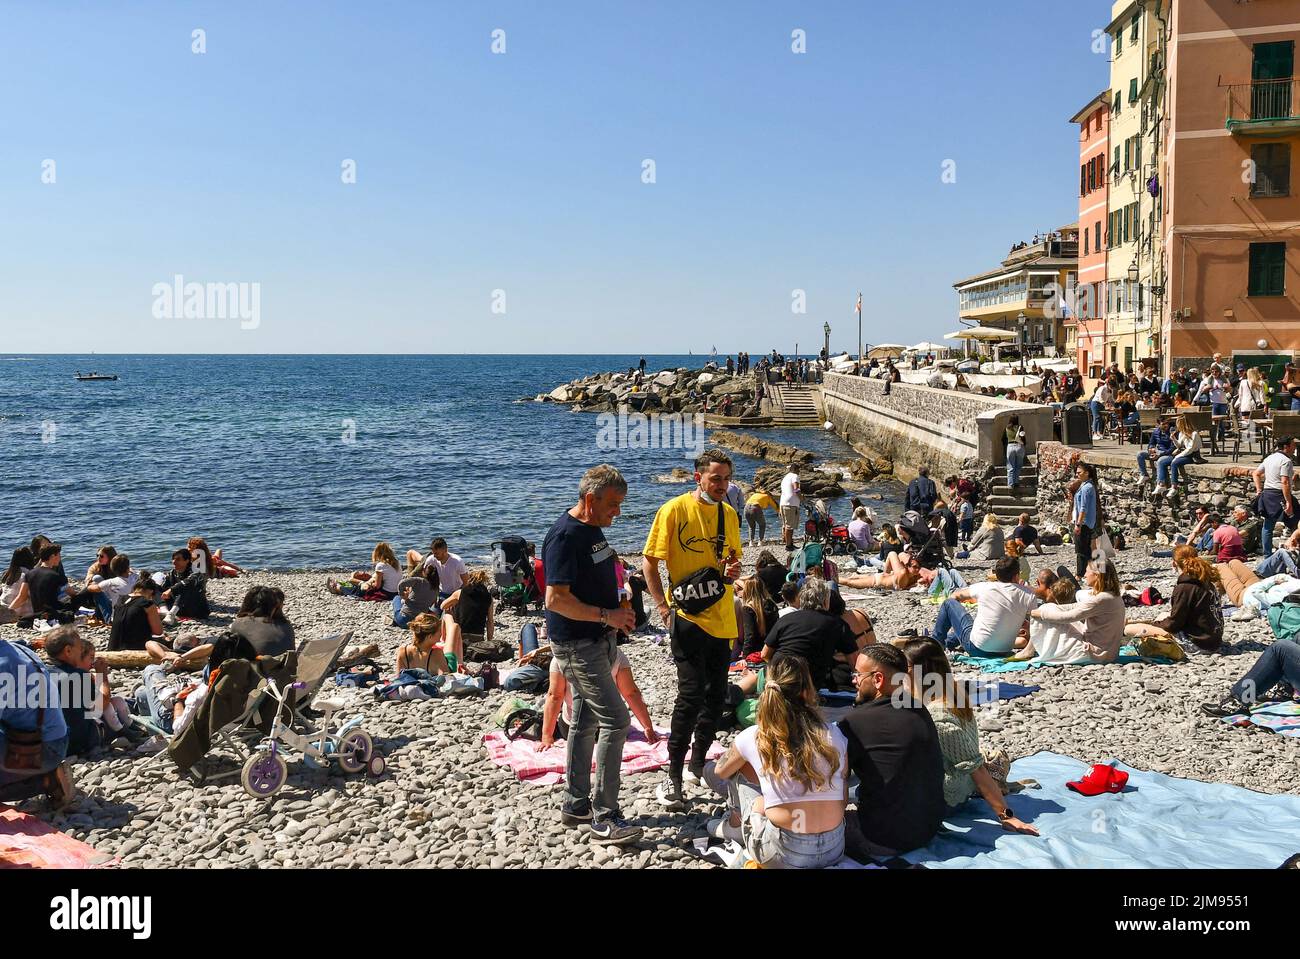 The small fishing village beach crowded with tourists on Easter Monday, Boccadasse, Genoa, Liguria, Italy Stock Photo